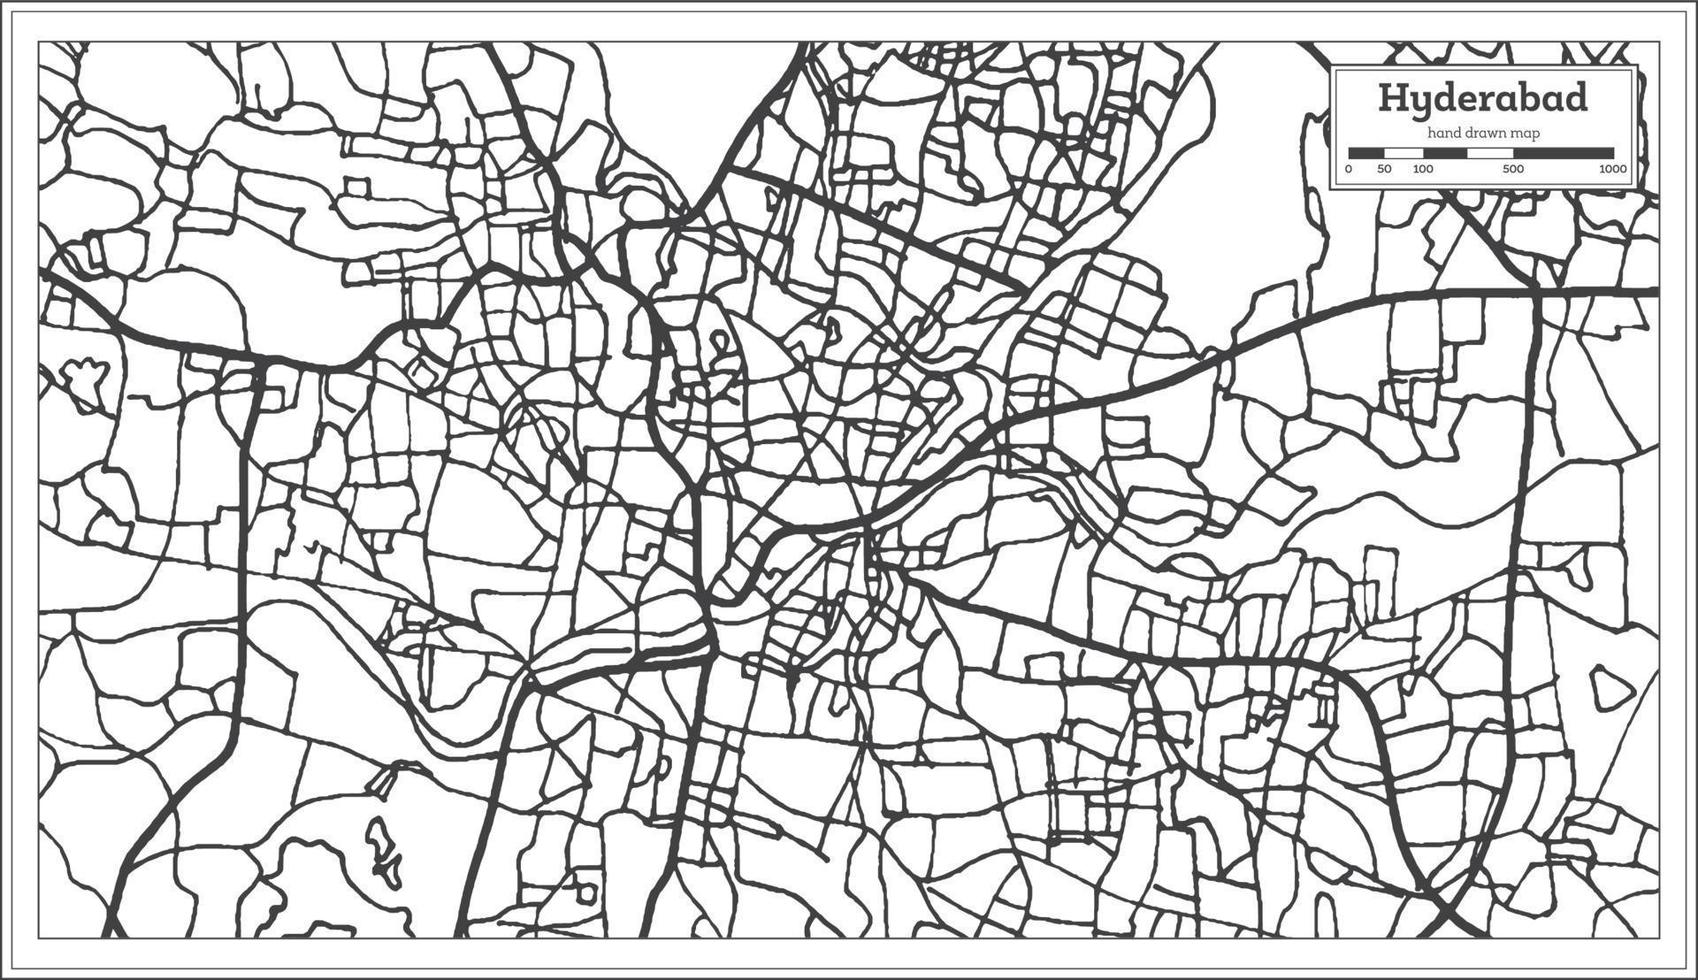 Hyderabad India City Map in Retro Style. Outline Map. vector